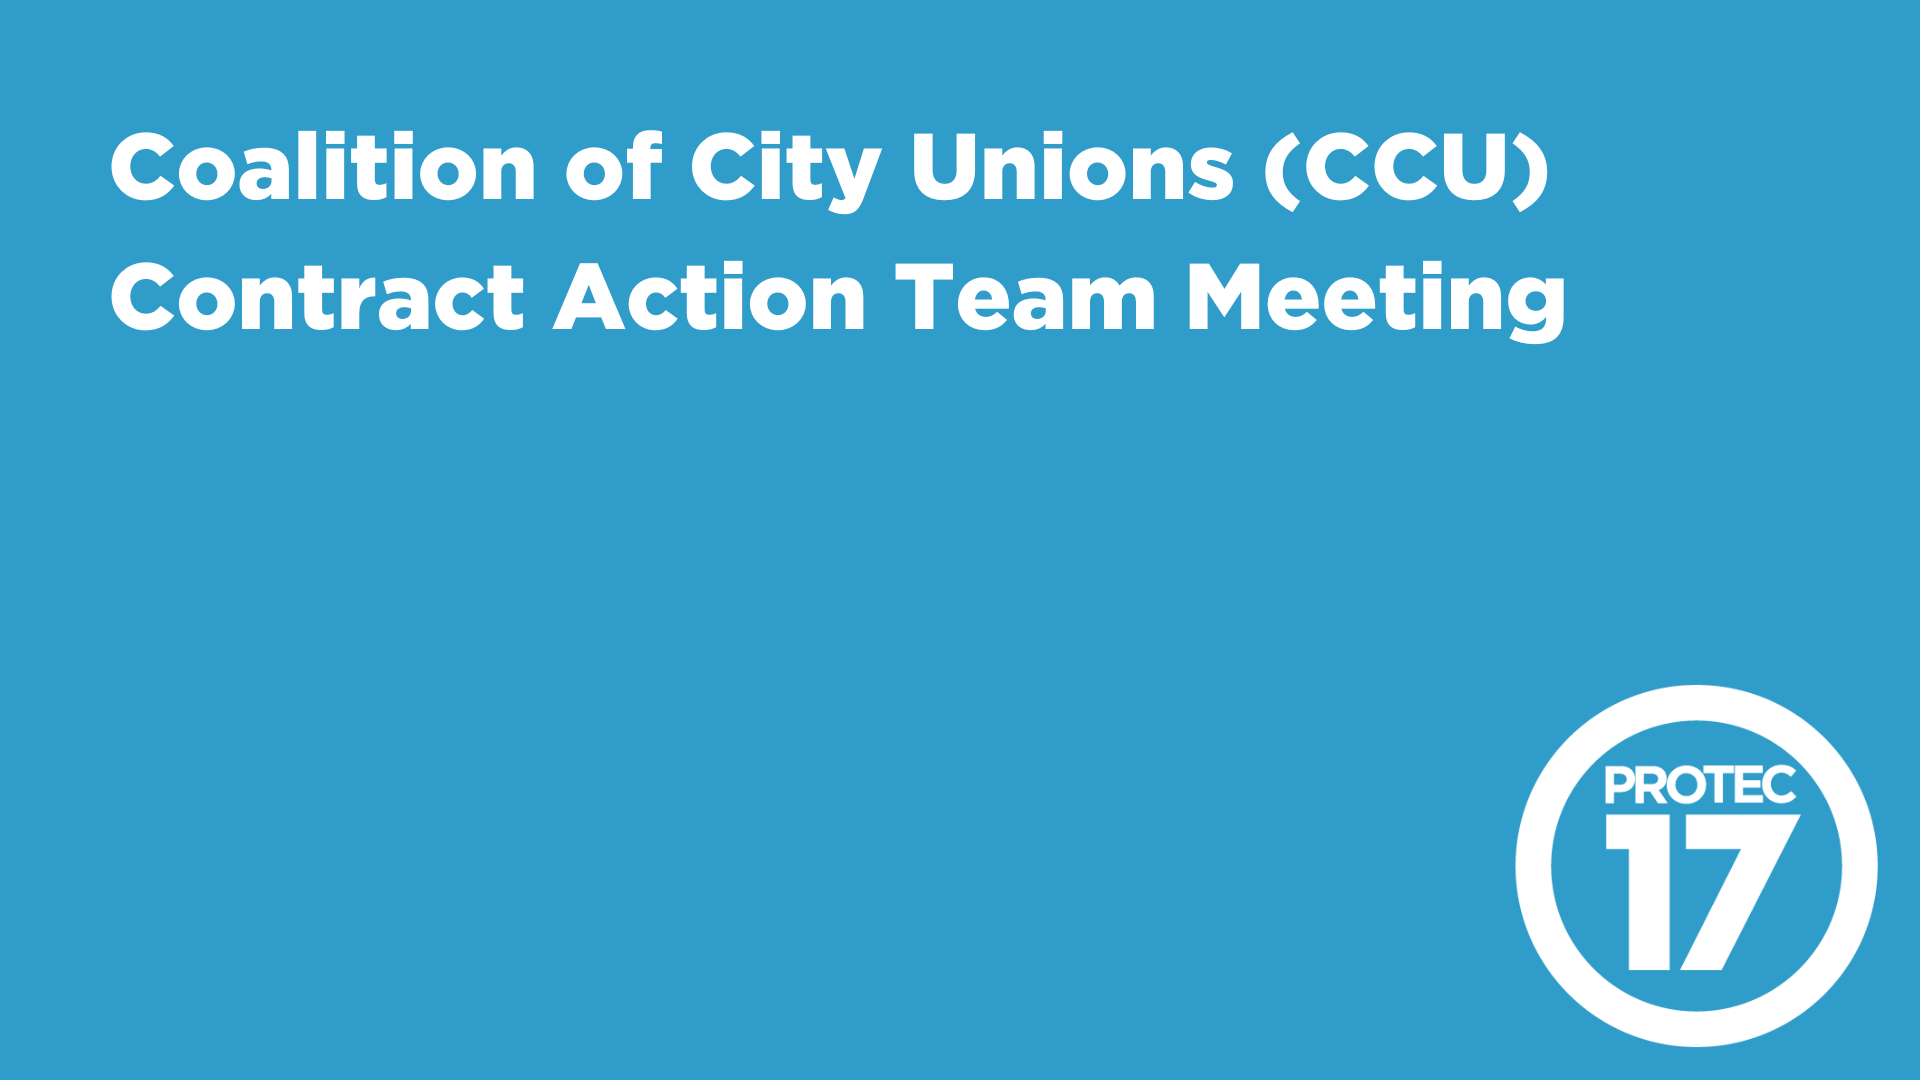 Text reads, "Coalition of City Unions (CCU) Contract Action Team Meeting." The PROTEC17 logo sits in the bottom right.